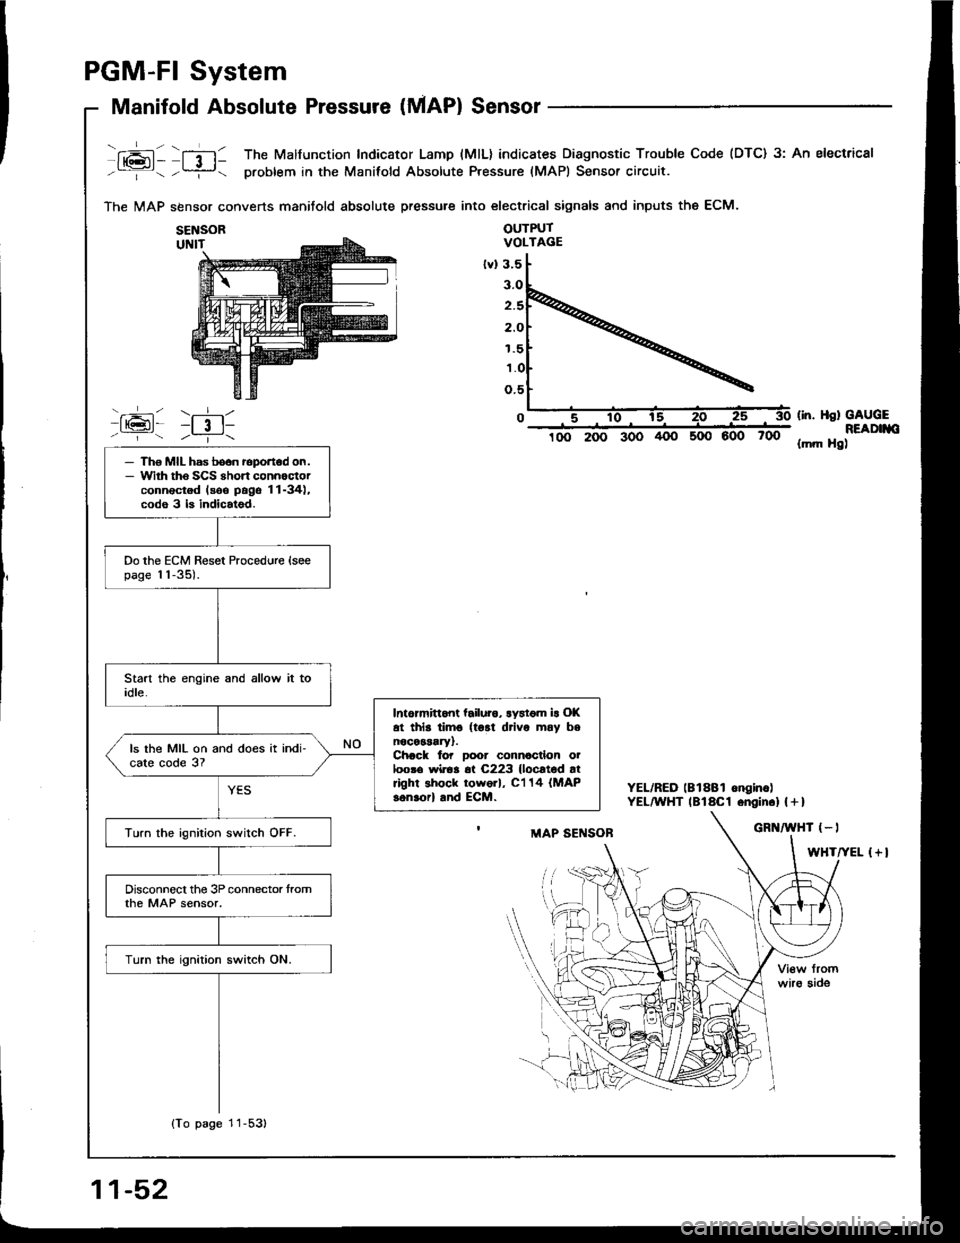 ACURA INTEGRA 1994  Service Repair Manual PGM-FI System
Manifold Absolute Pressure (MAP) Sensor
fxai - lfil1 The Malfunction Indicator Lamp (MlL) indicates Diagnostic Trouble Code (DTC) 3: An electrical
-:- -?- problem in the Manifold Absolut